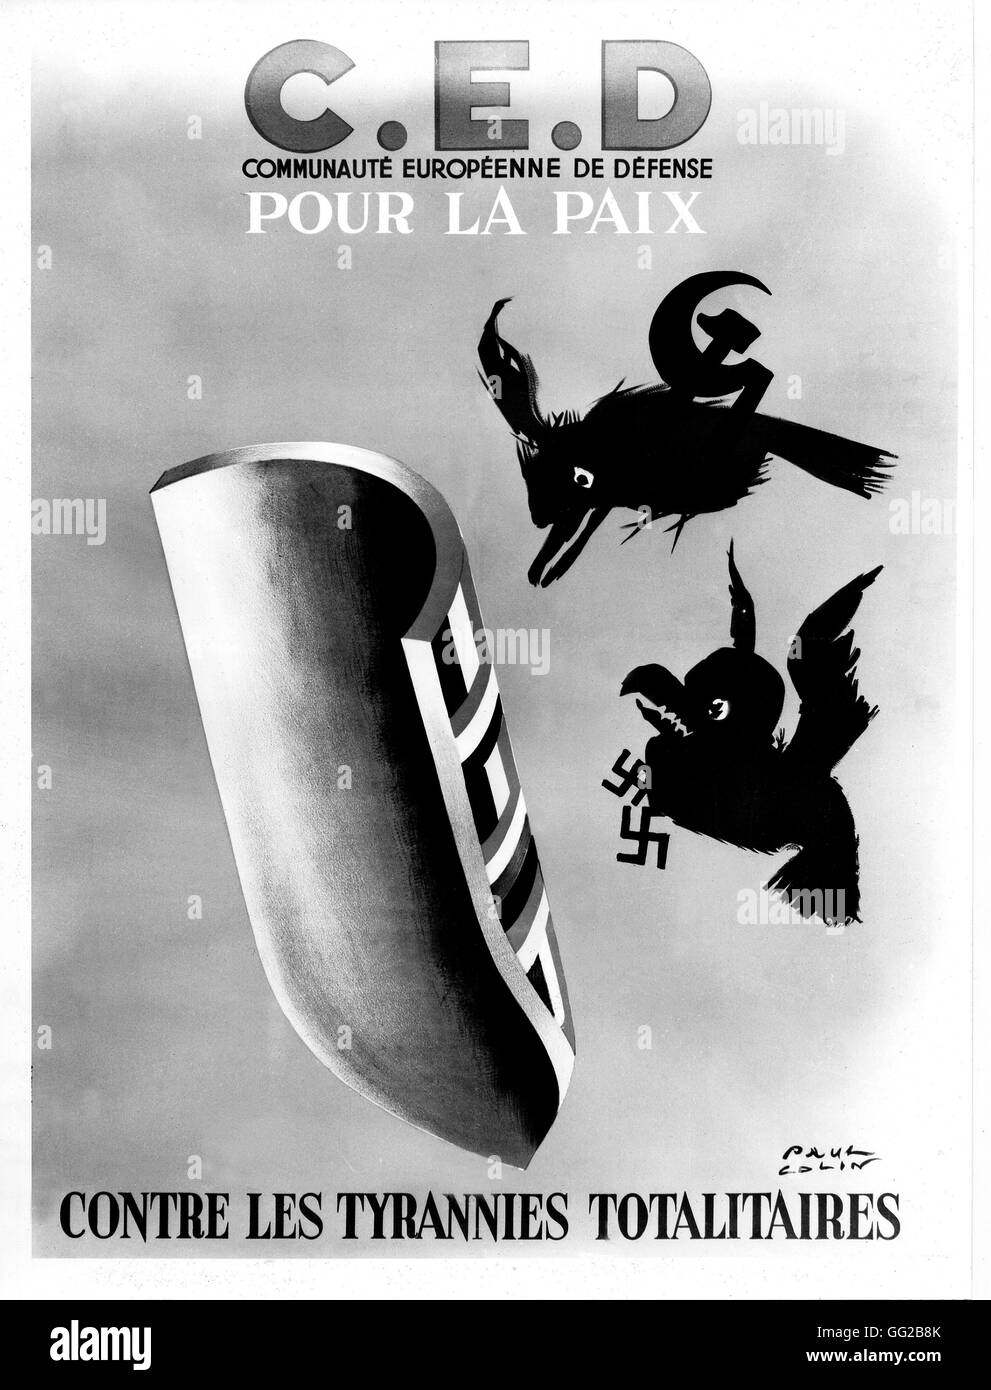 Paul Colin, Propaganda poster for the E.C.D. (European Community for the Defense, against totalitarian regimes) 1954 France Private collection Stock Photo